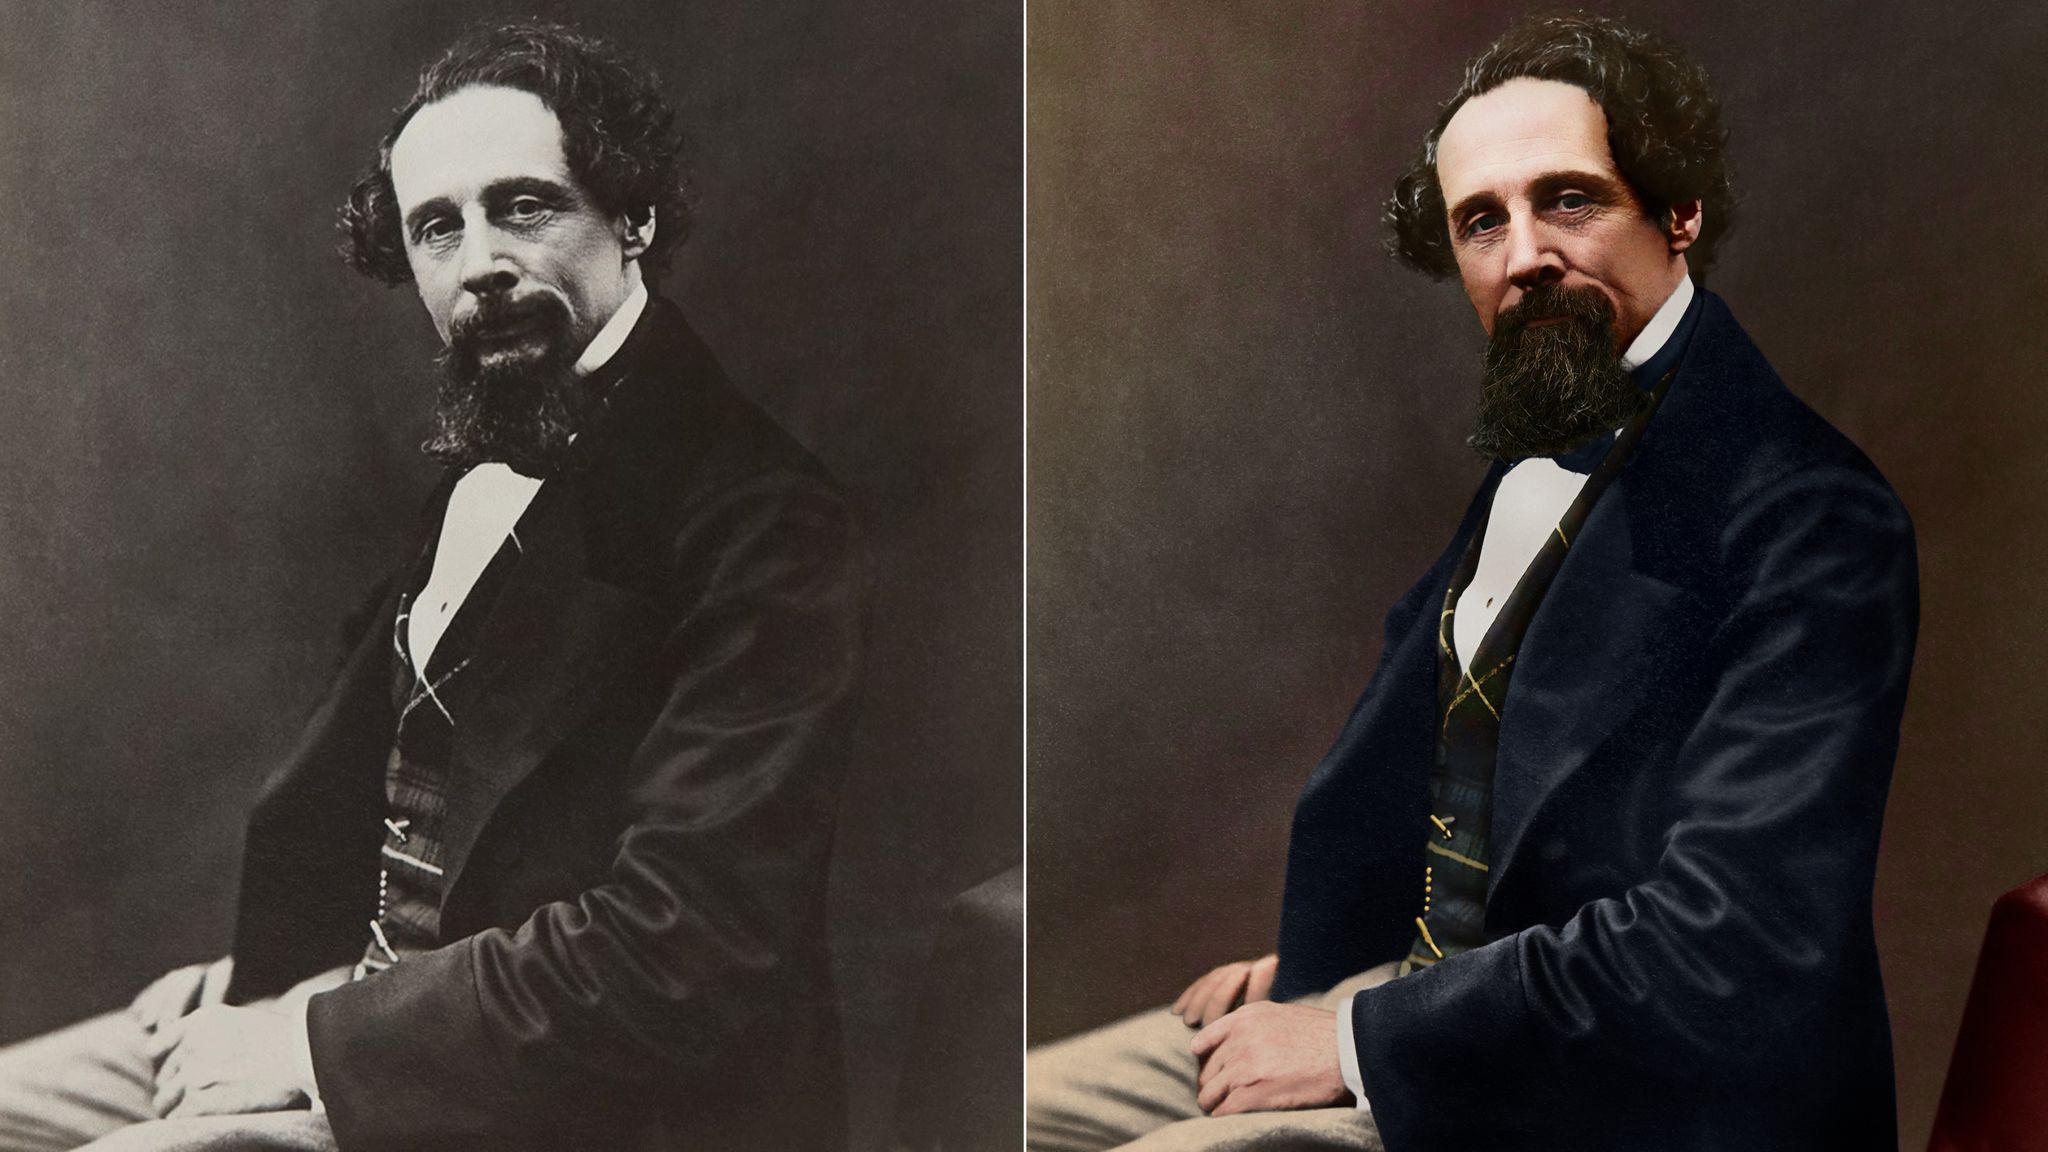 Charles Dickens Black And White Image Colourised For New Project